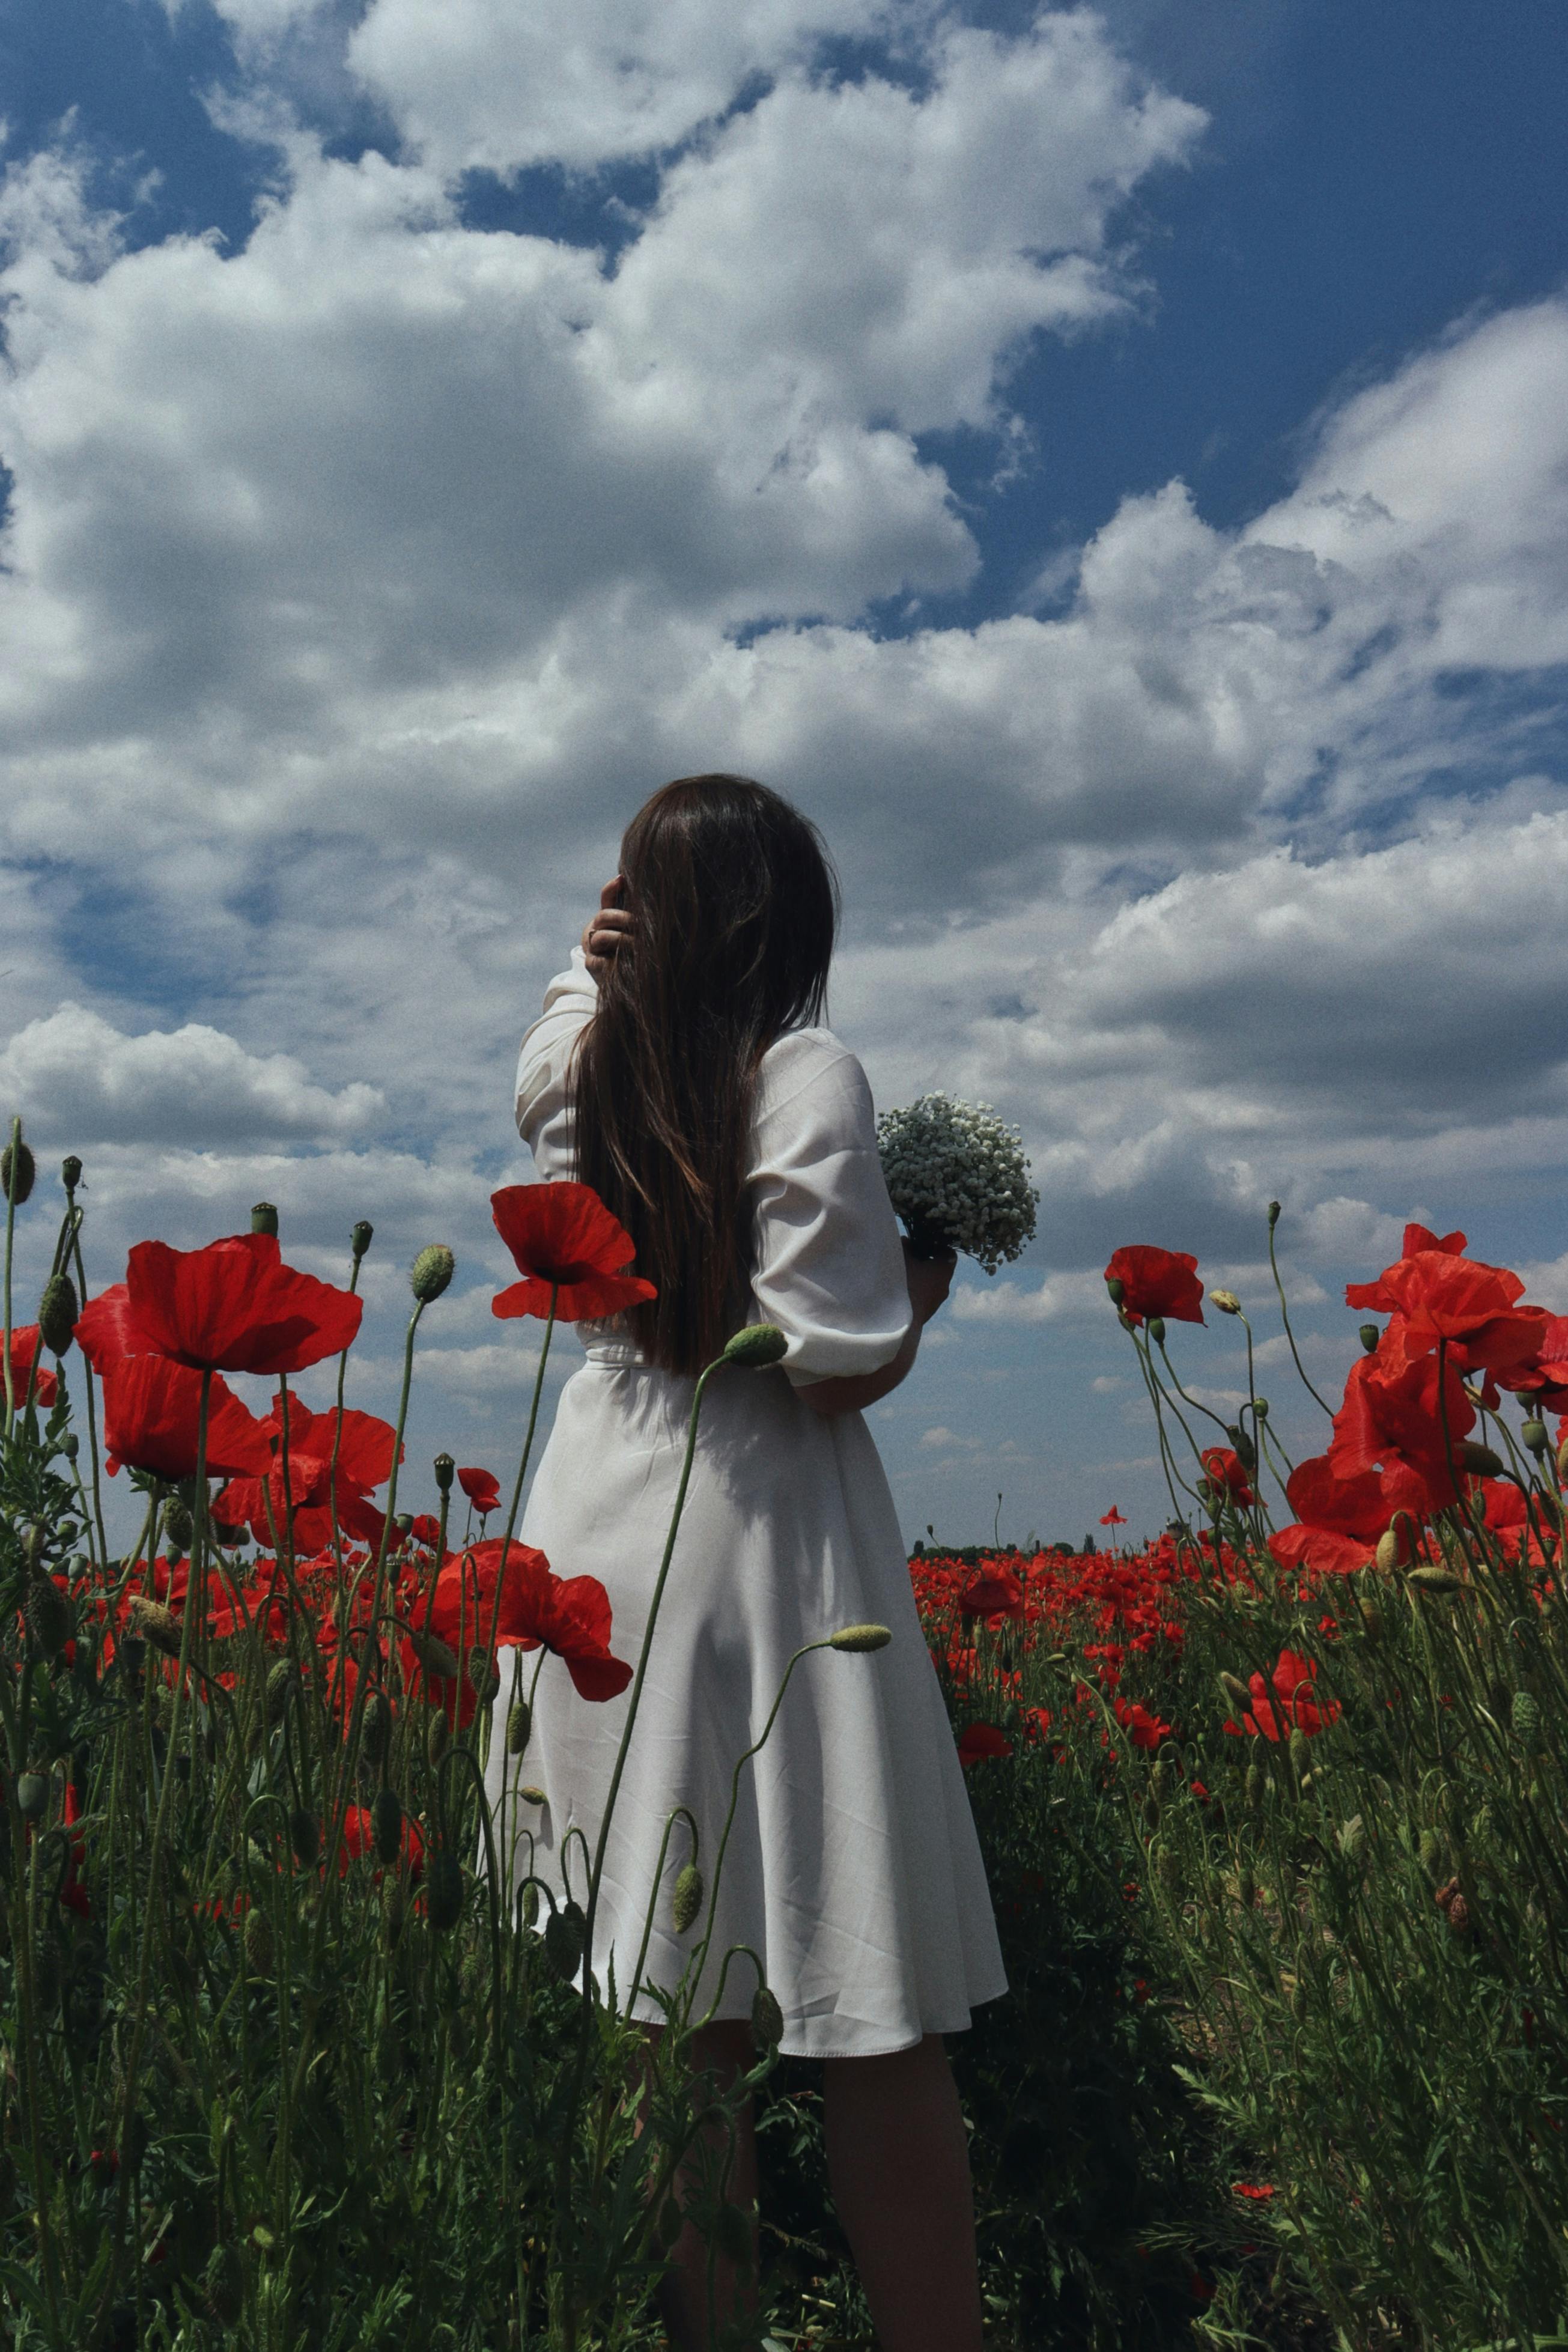 https://images.pexels.com/photos/17156356/pexels-photo-17156356/free-photo-of-a-brunette-in-a-white-dress-standing-on-a-poppy-field.jpeg